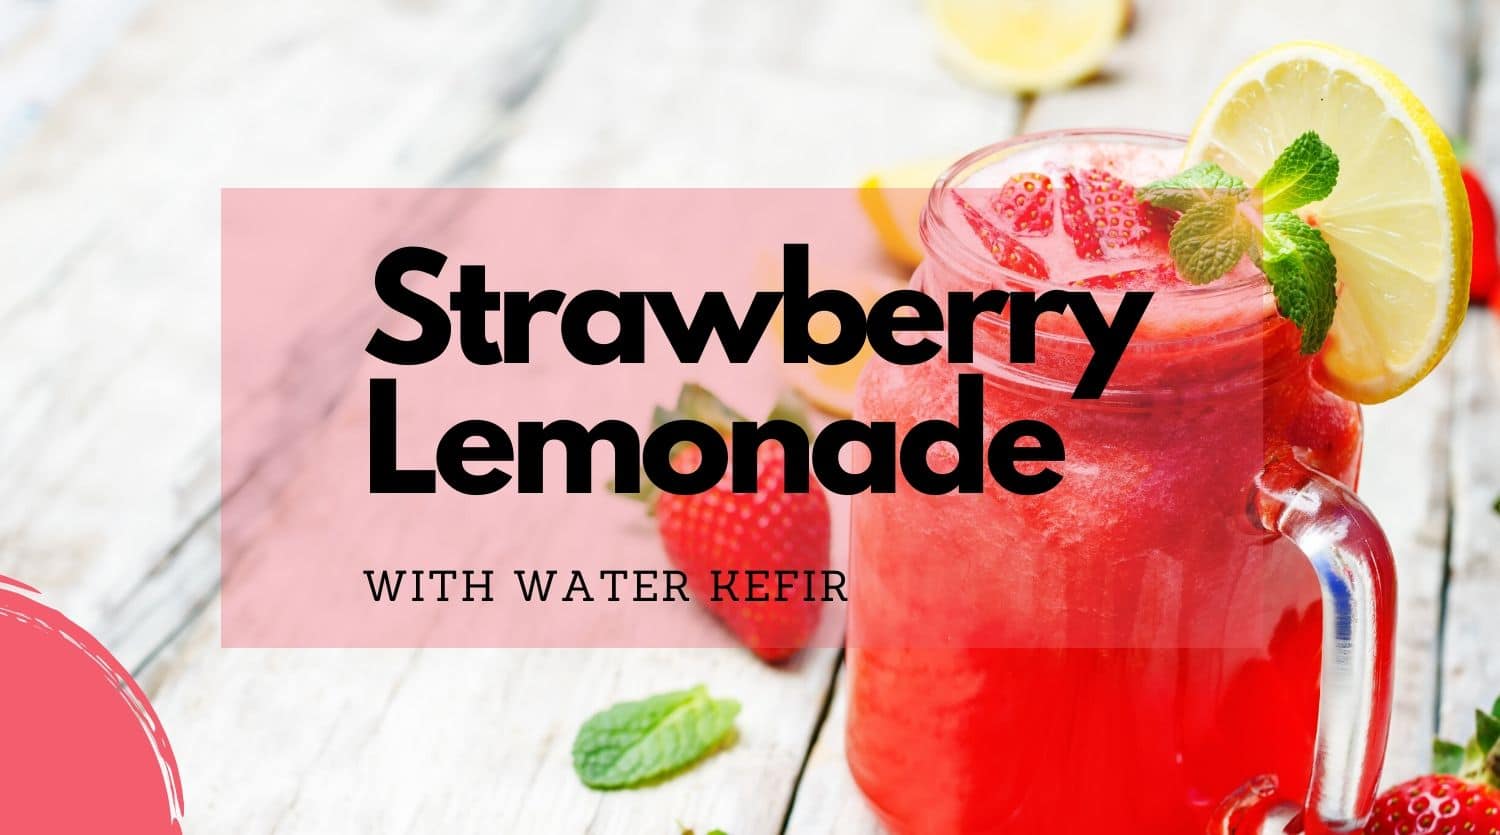 How to Make Strawberry Lemonade With Water Kefir